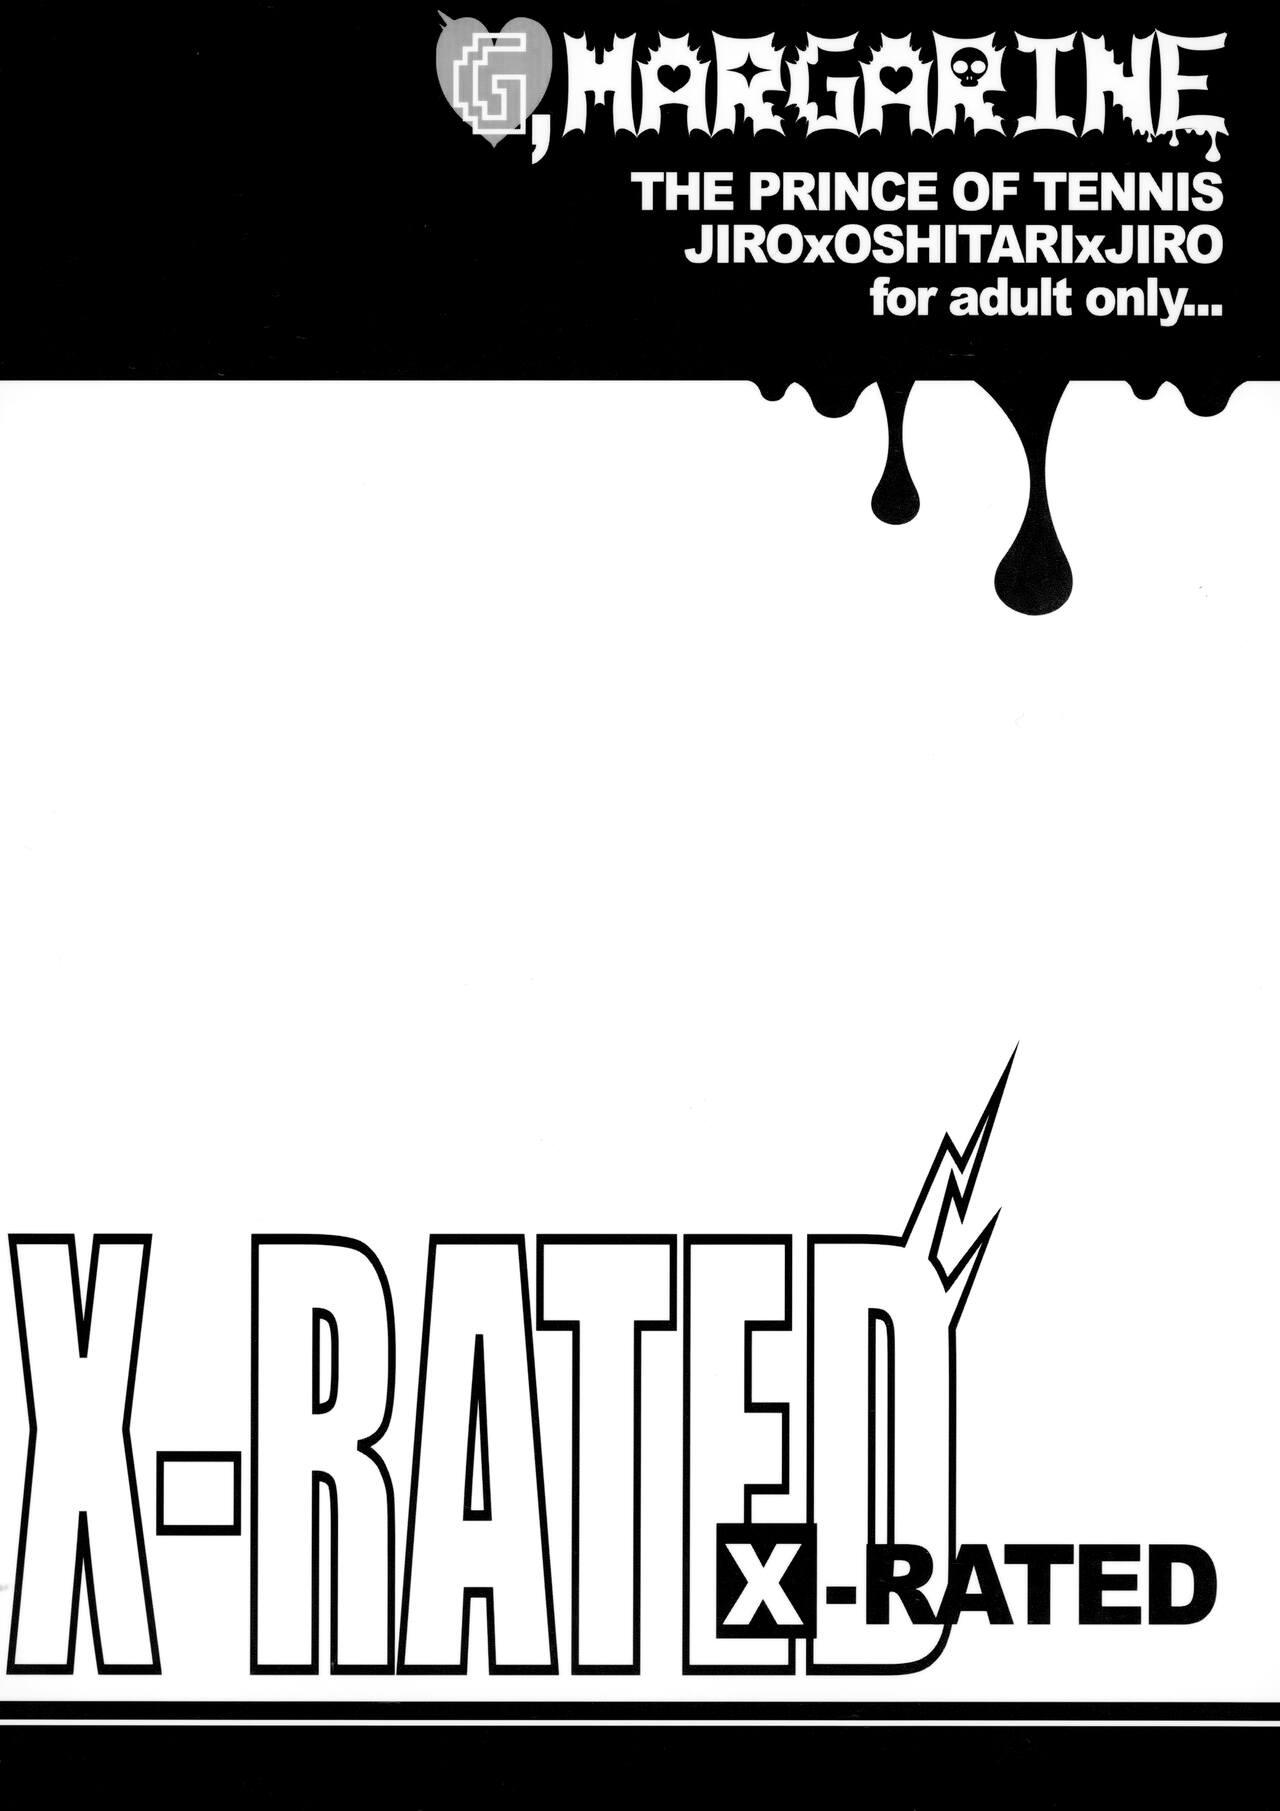 X-RATED 25